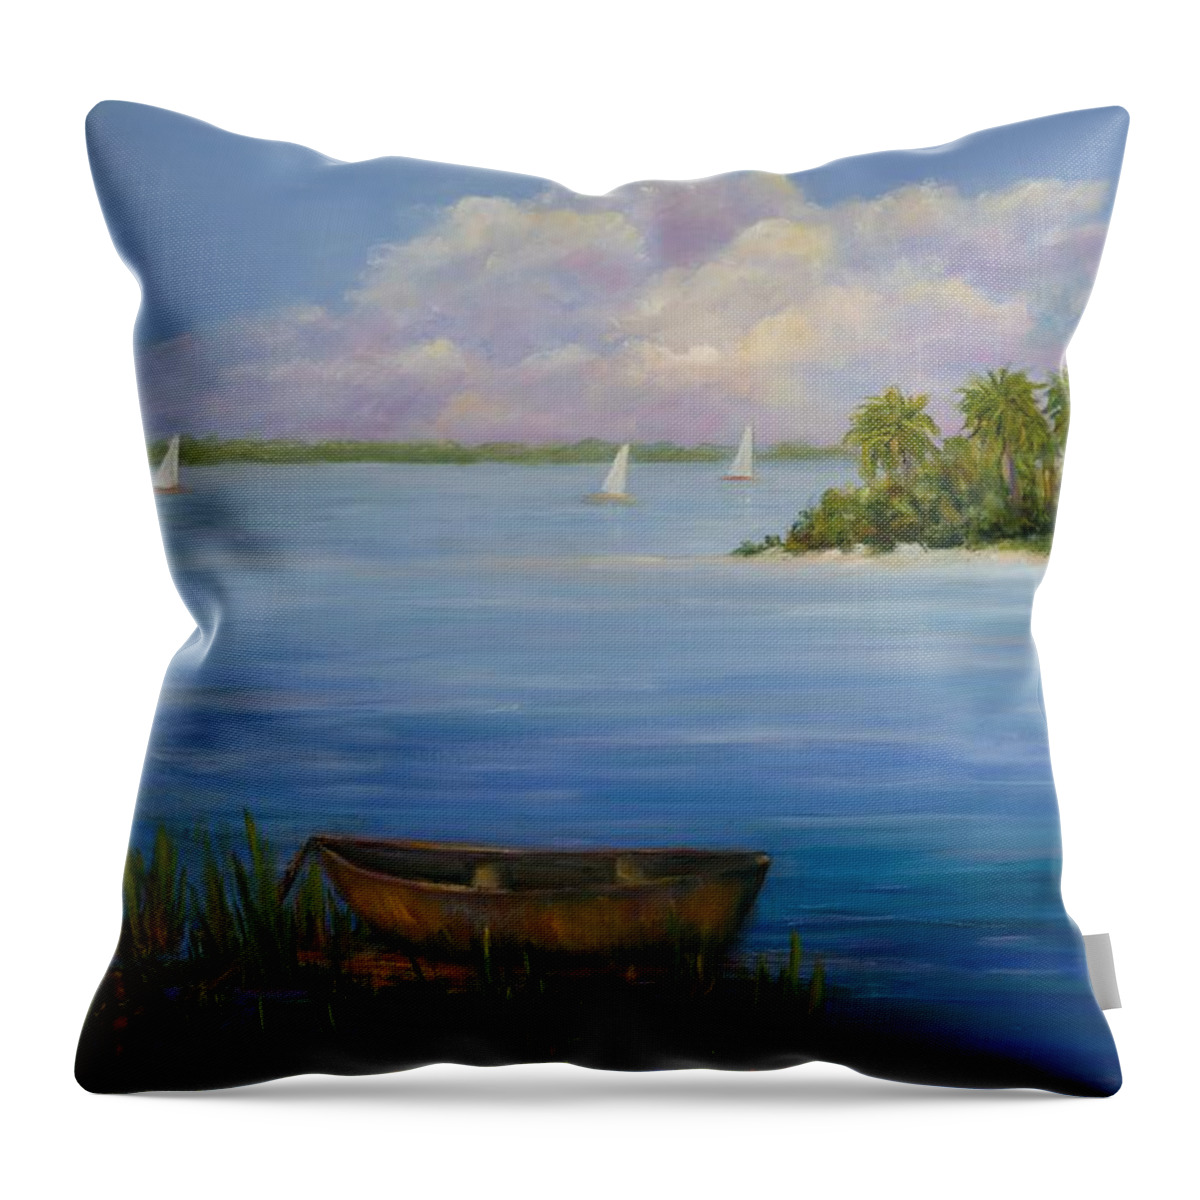 Small Hare Island In Winyah Bay Throw Pillow featuring the painting Island in the Bay by Audrey McLeod